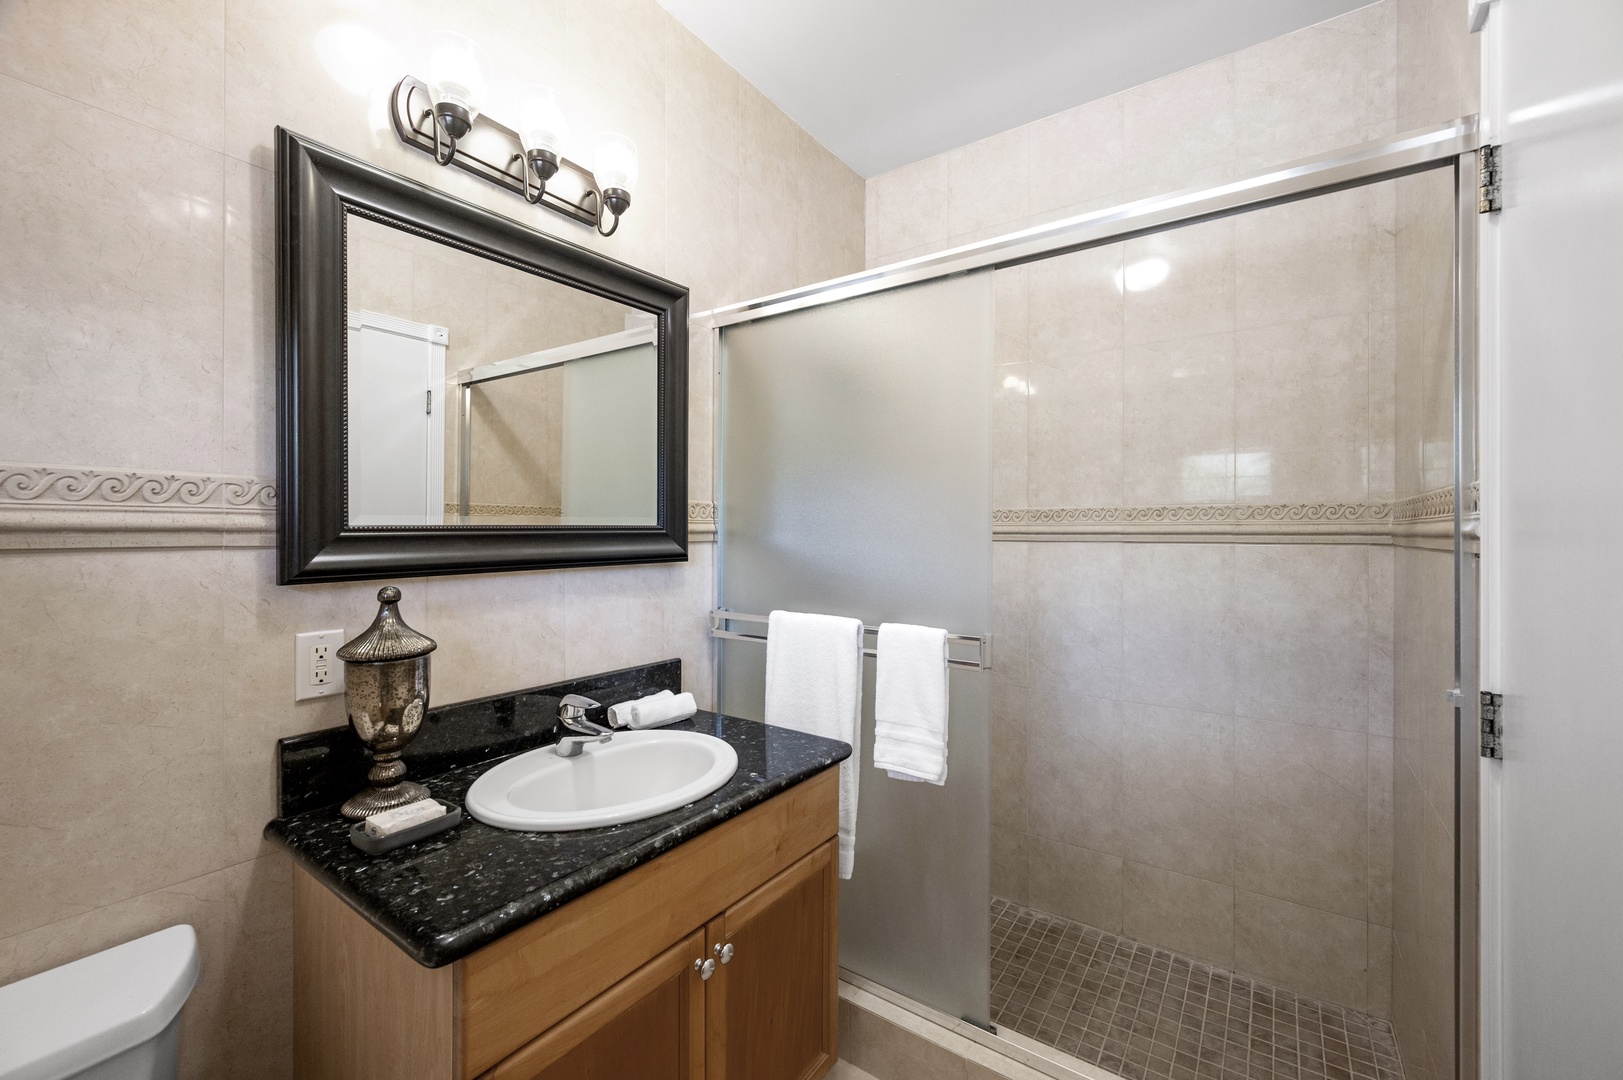 Honolulu Vacation Rentals, Lotus on a Hill* - Full Bath with single vanity and walk-in shower